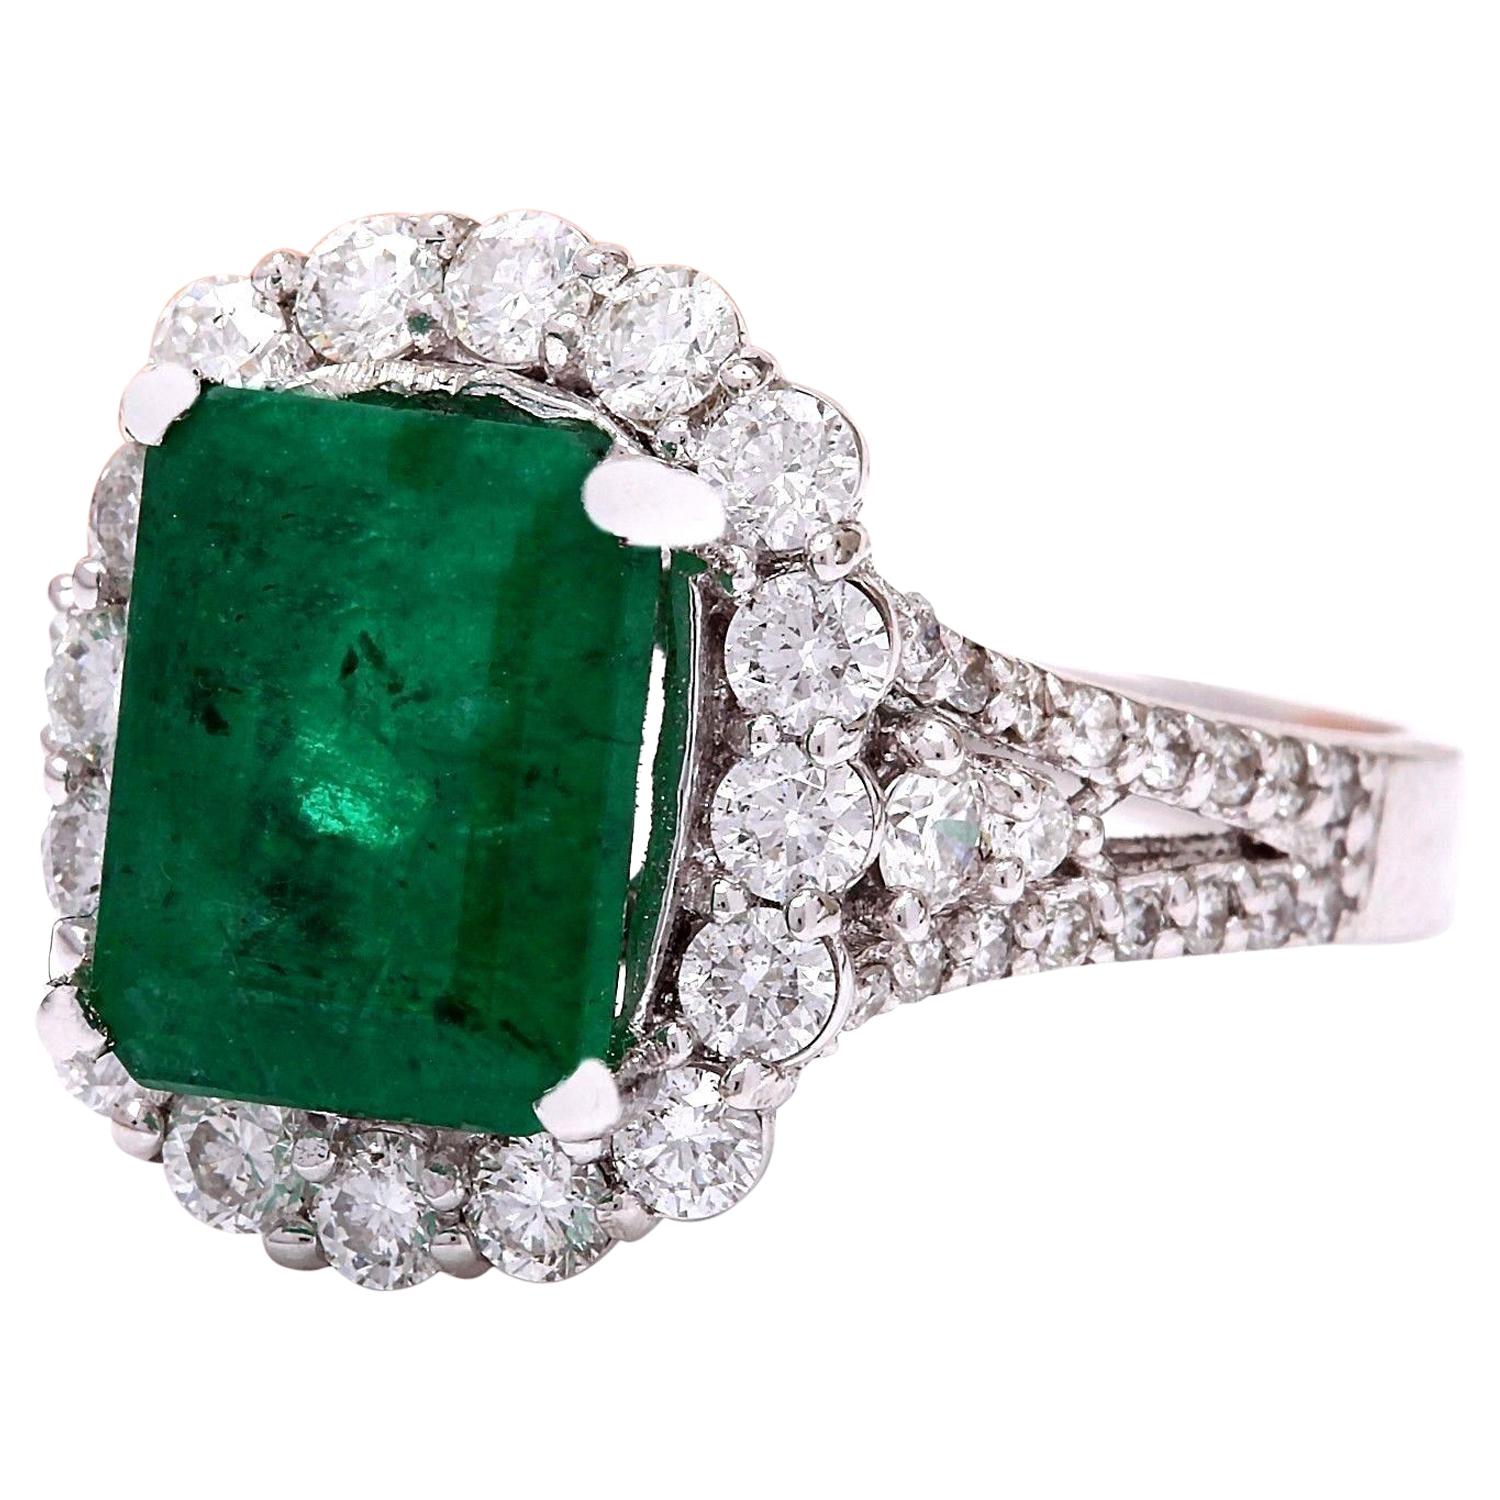 3.90 Carat Natural Emerald 14K Solid White Gold Diamond Ring
 Item Type: Ring
 Item Style: Engagement
 Material: 14K White Gold
 Mainstone: Emerald
 Stone Color: Green
 Stone Weight: 2.90 Carat
 Stone Shape: Emerald
 Stone Quantity: 1
 Stone